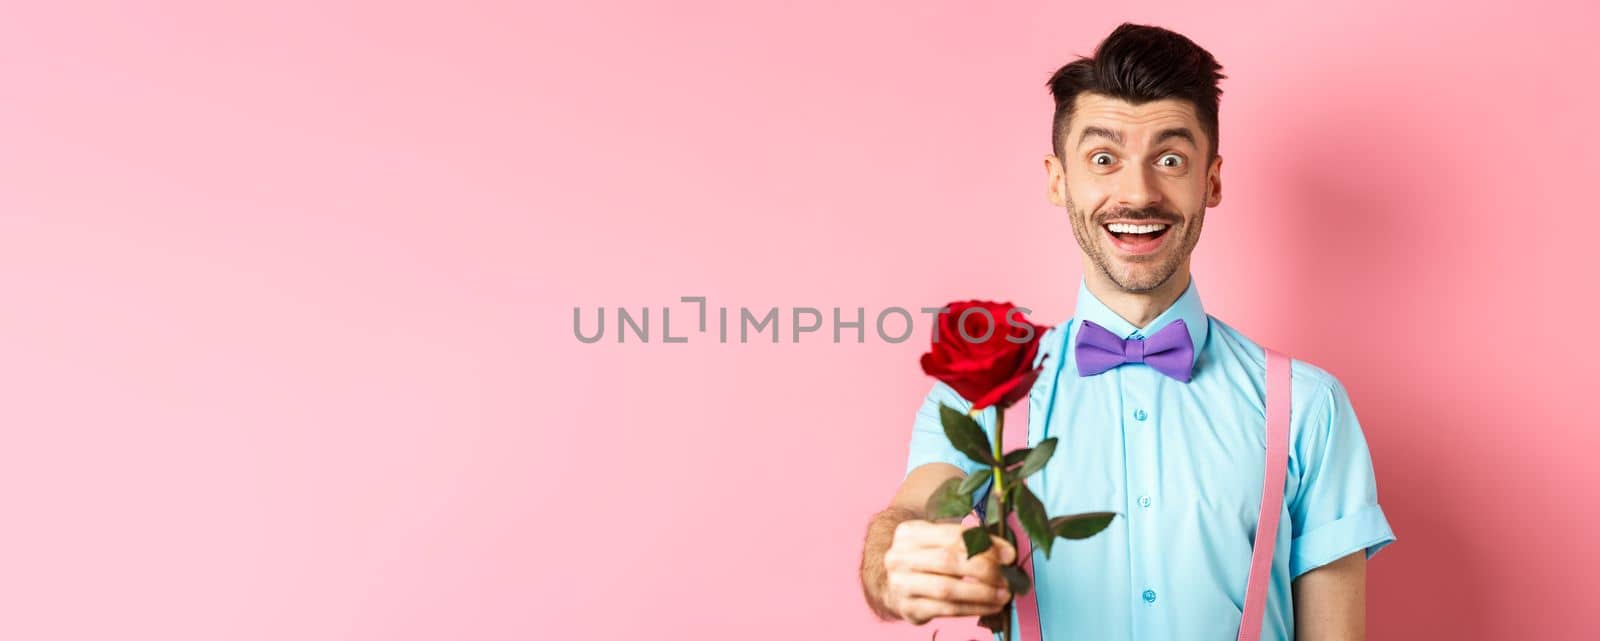 Valentines day and romance concept. Happy smiling man giving you red rose on romantic date, standing on pink background in bow-tie and shirt.